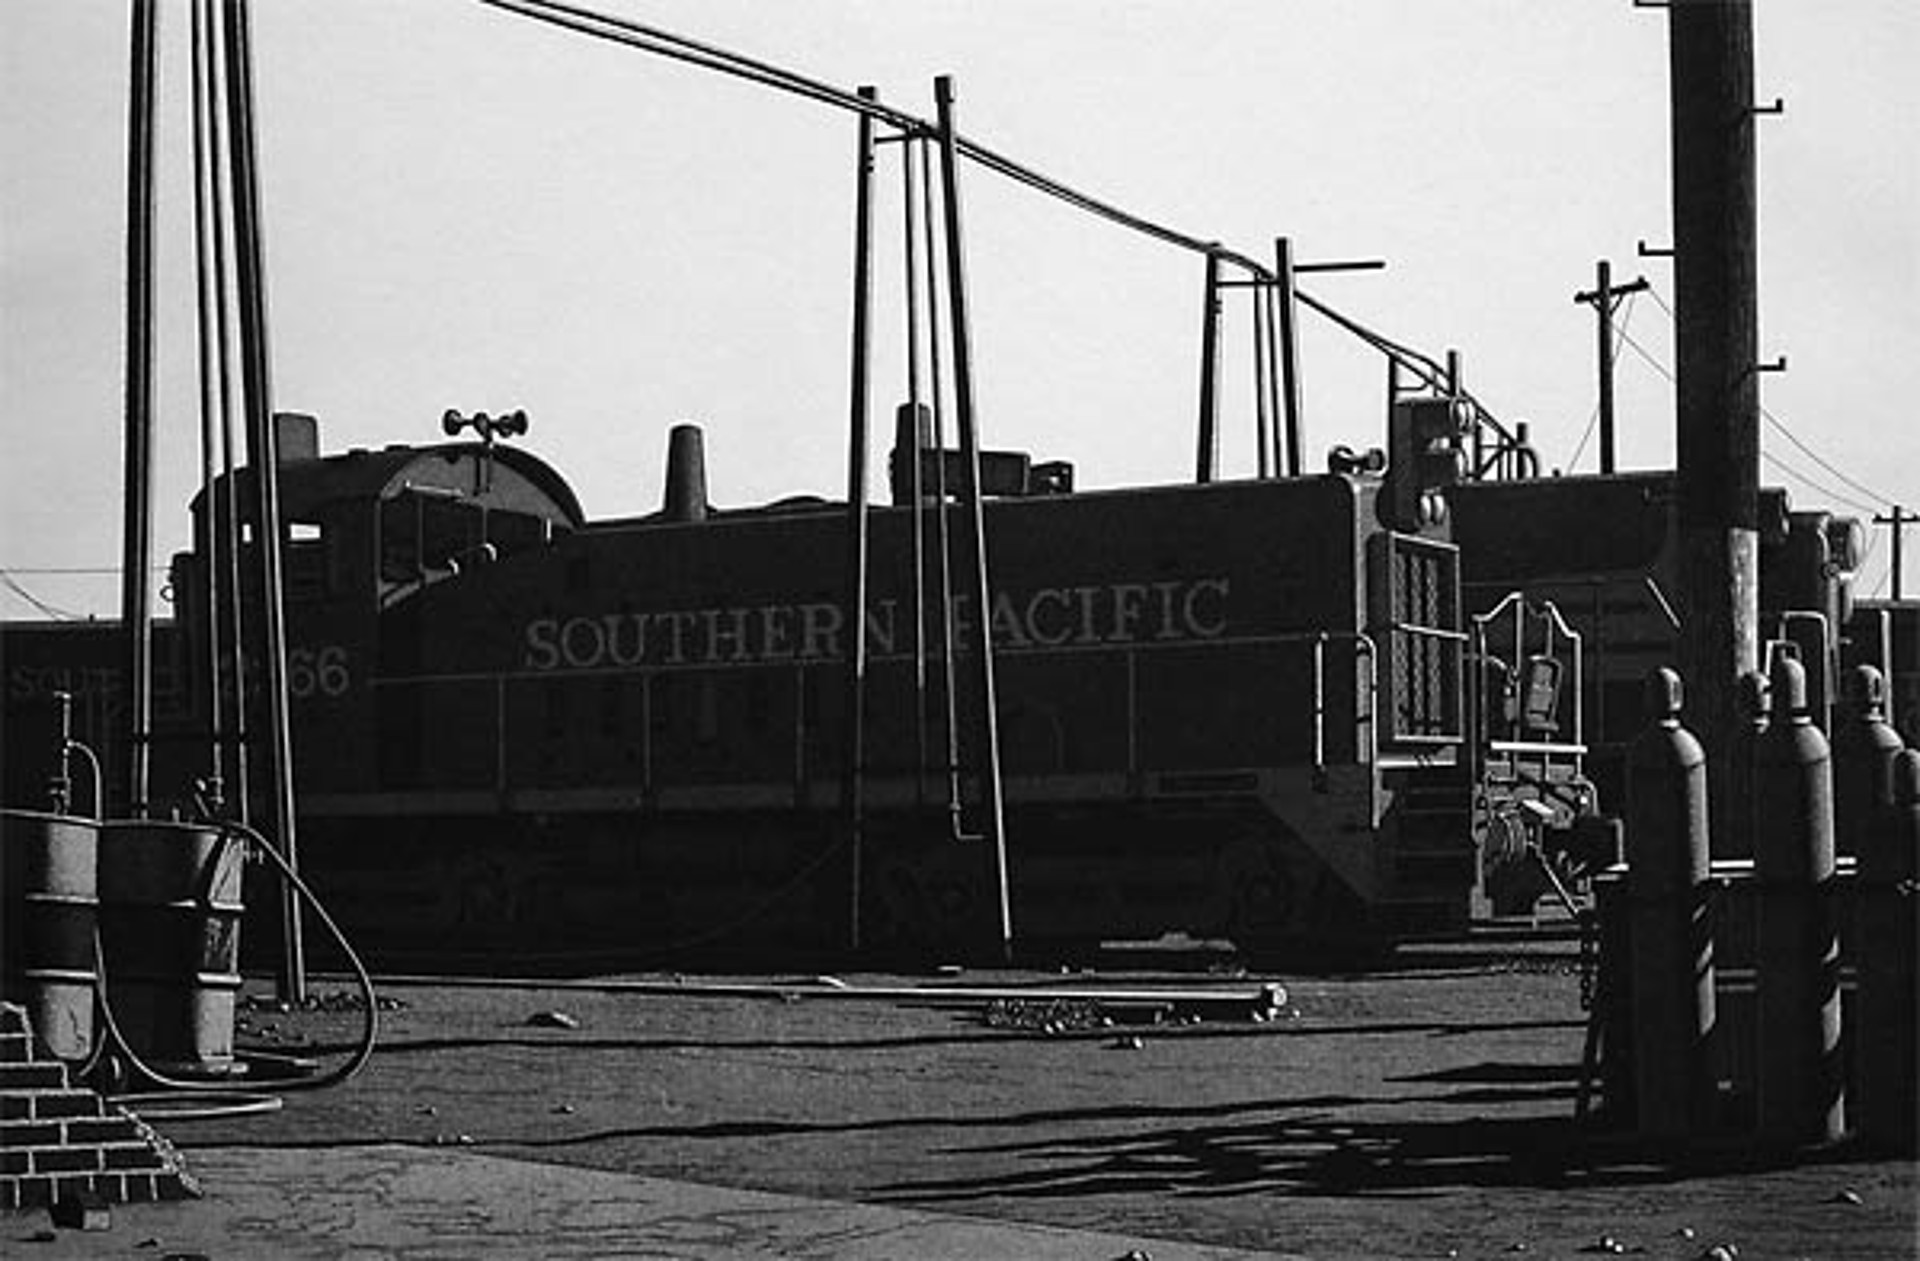 Southern Pacific Engines by James Torlakson